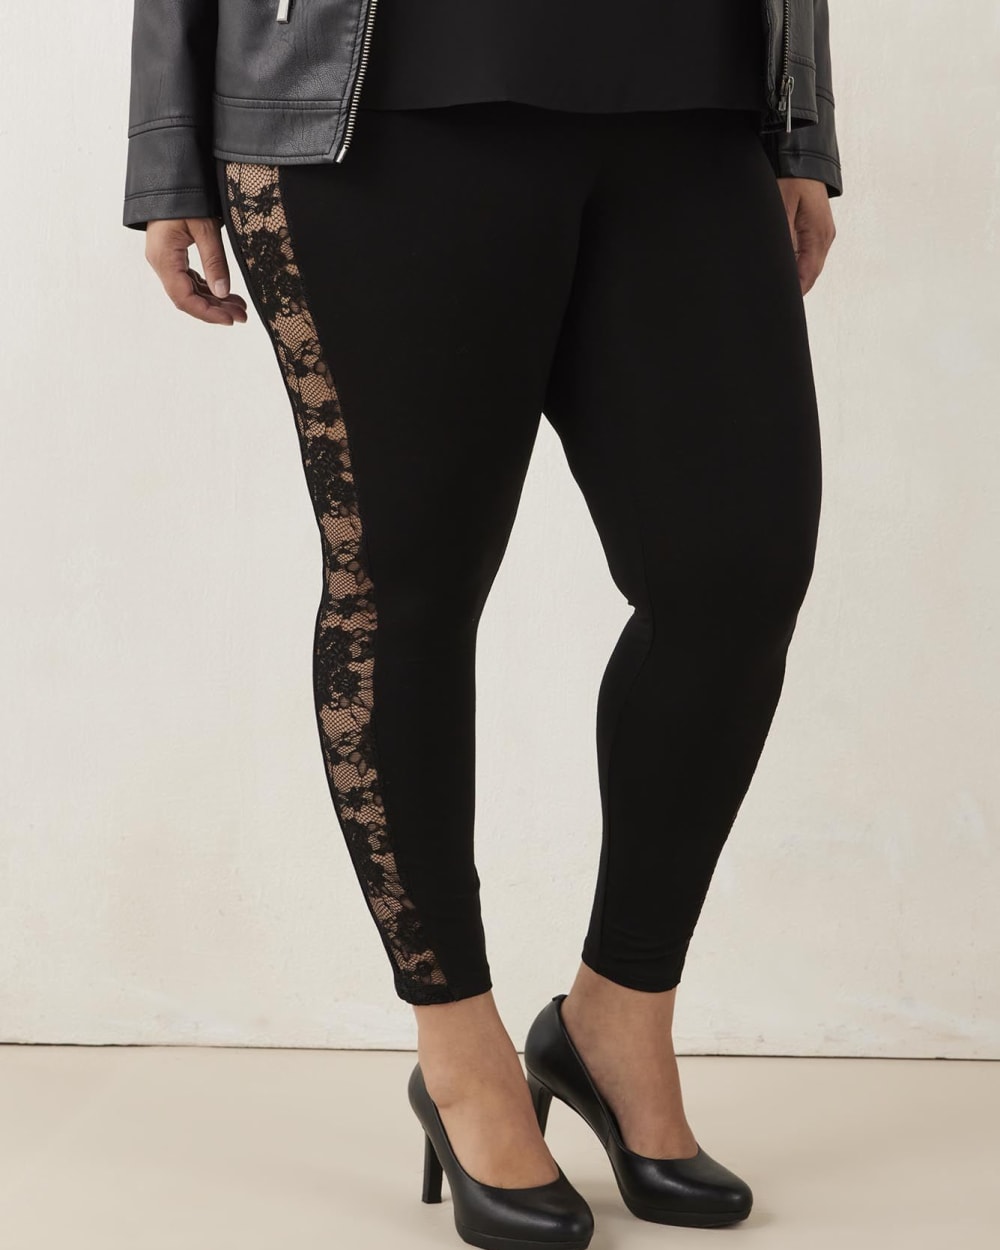 Responsible, Fashion Leggings with Lace Inserts - PENN. Essentials ...